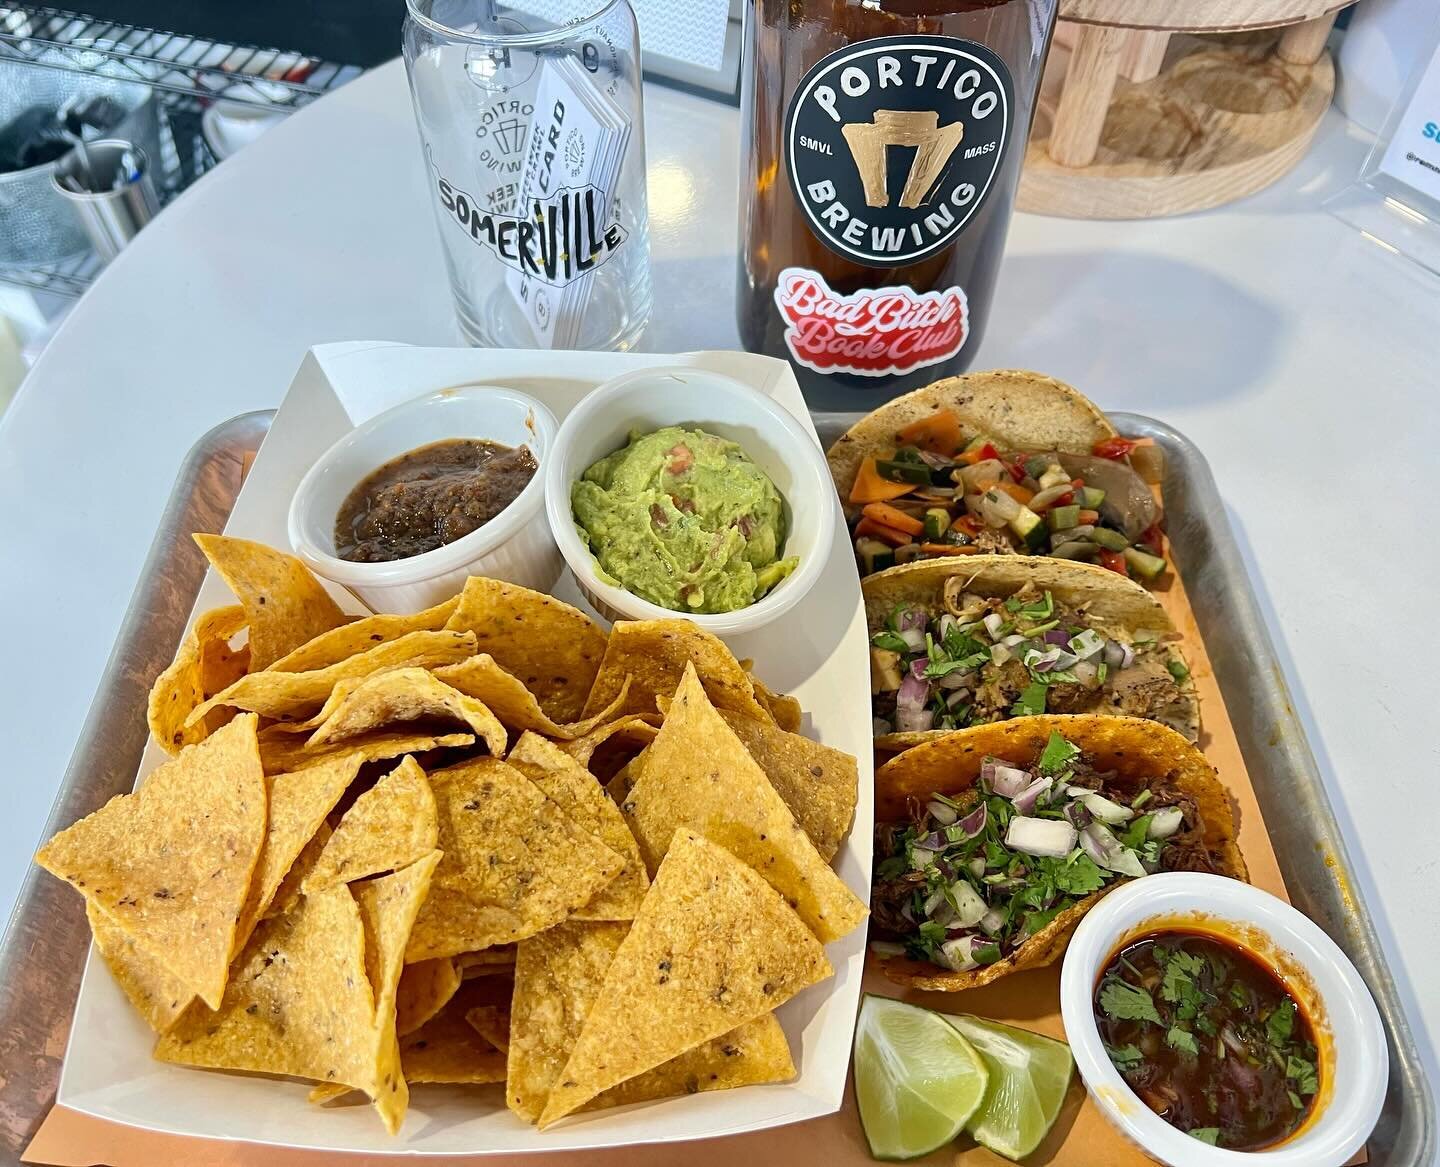 We are open until 6 pm on Sundays @porticobrewing If you&rsquo;re in the neighborhood, stop by. #yourneighborhoodtaqueria